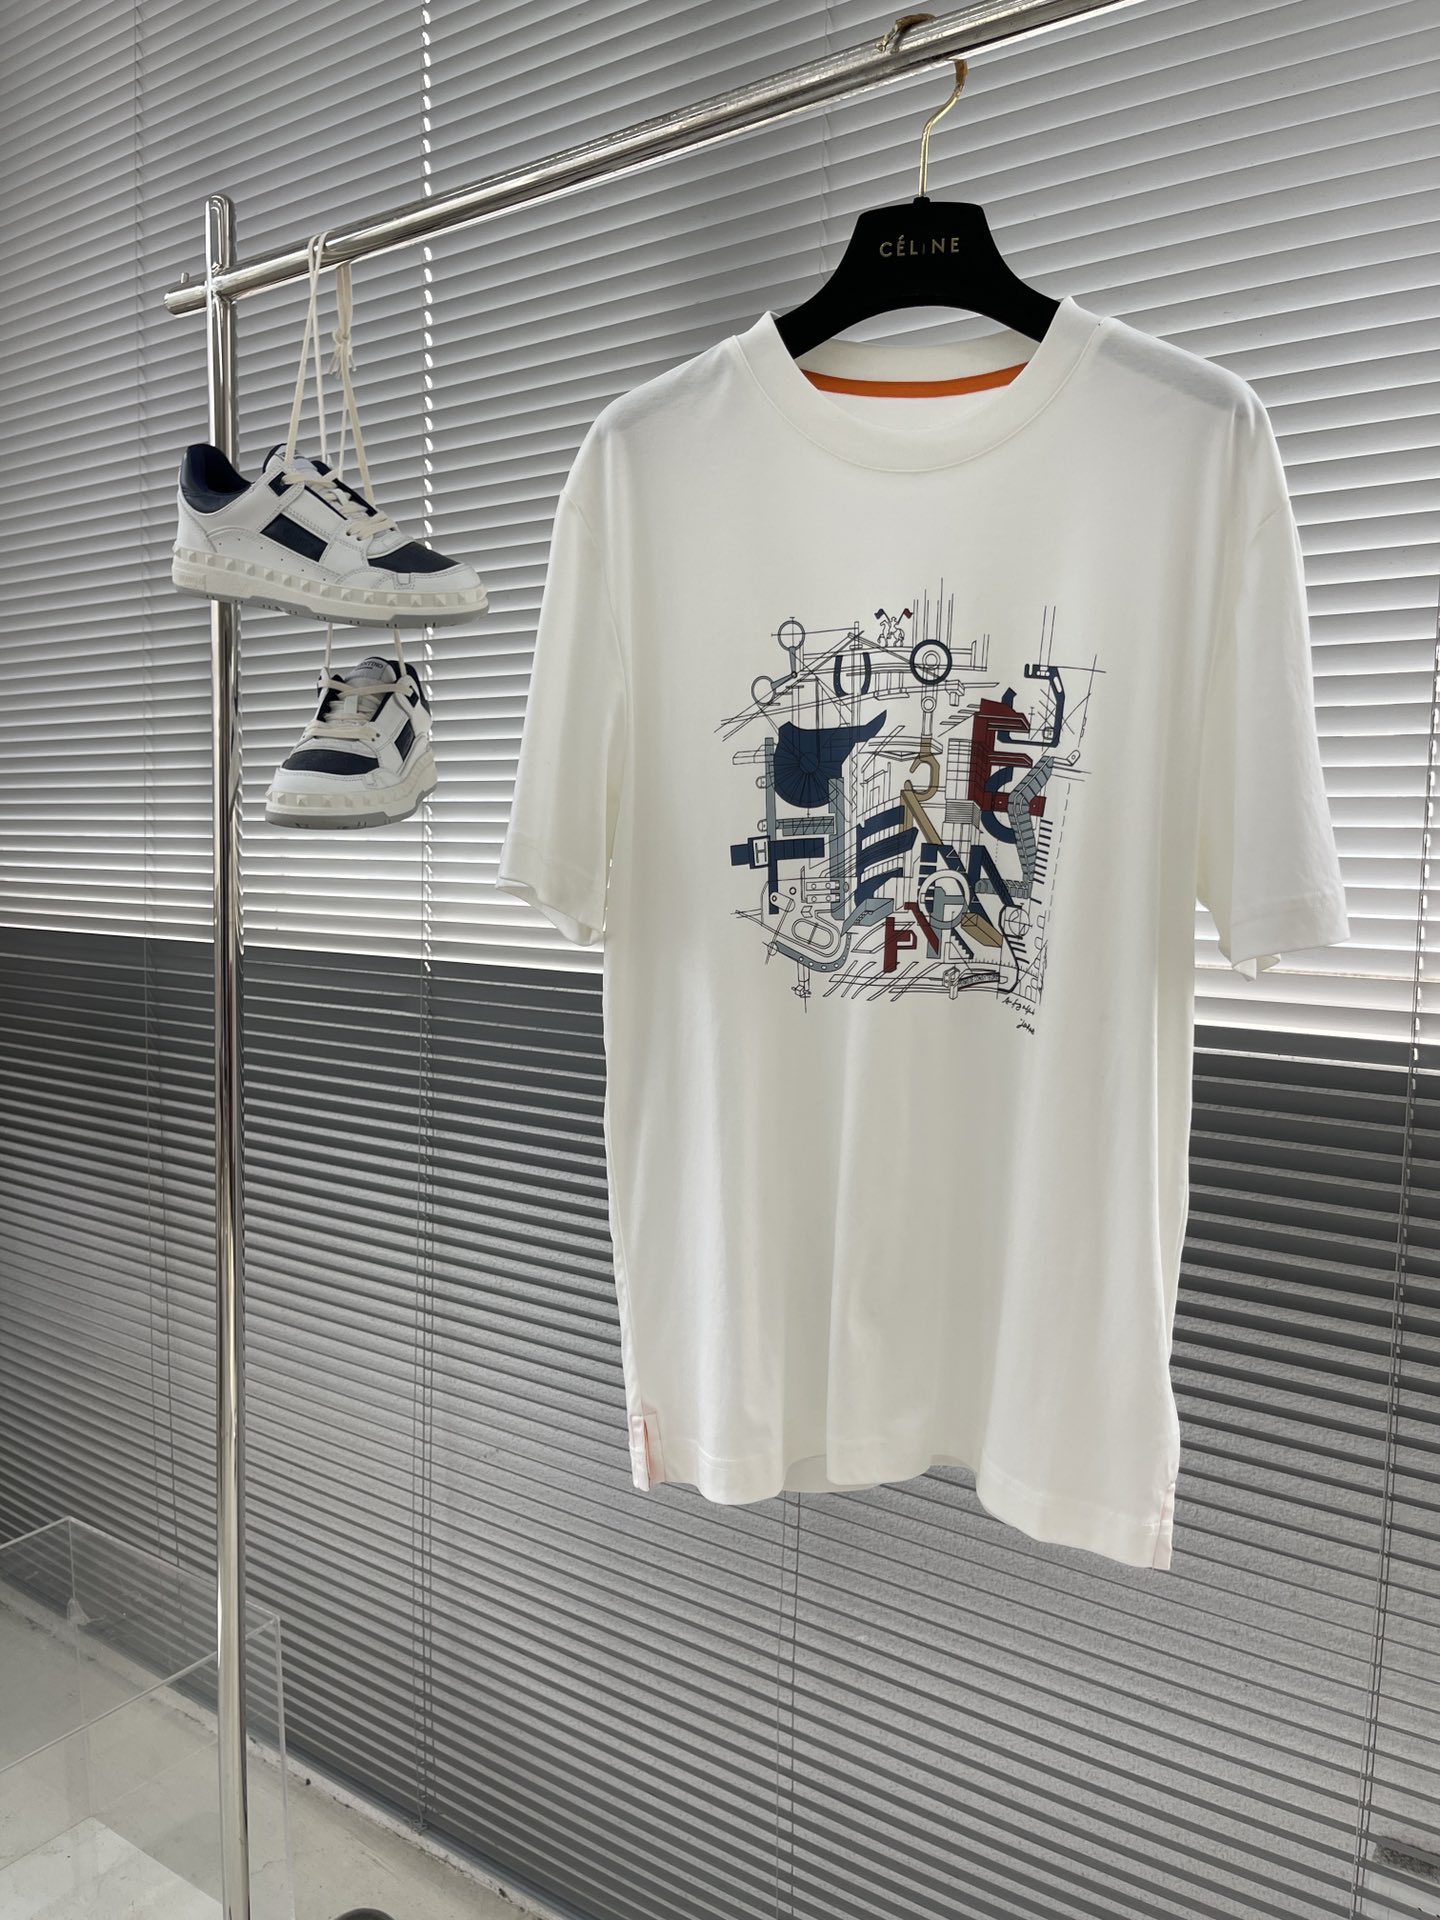 Hermes Clothing T-Shirt Men Cotton Mercerized Spring/Summer Collection Fashion